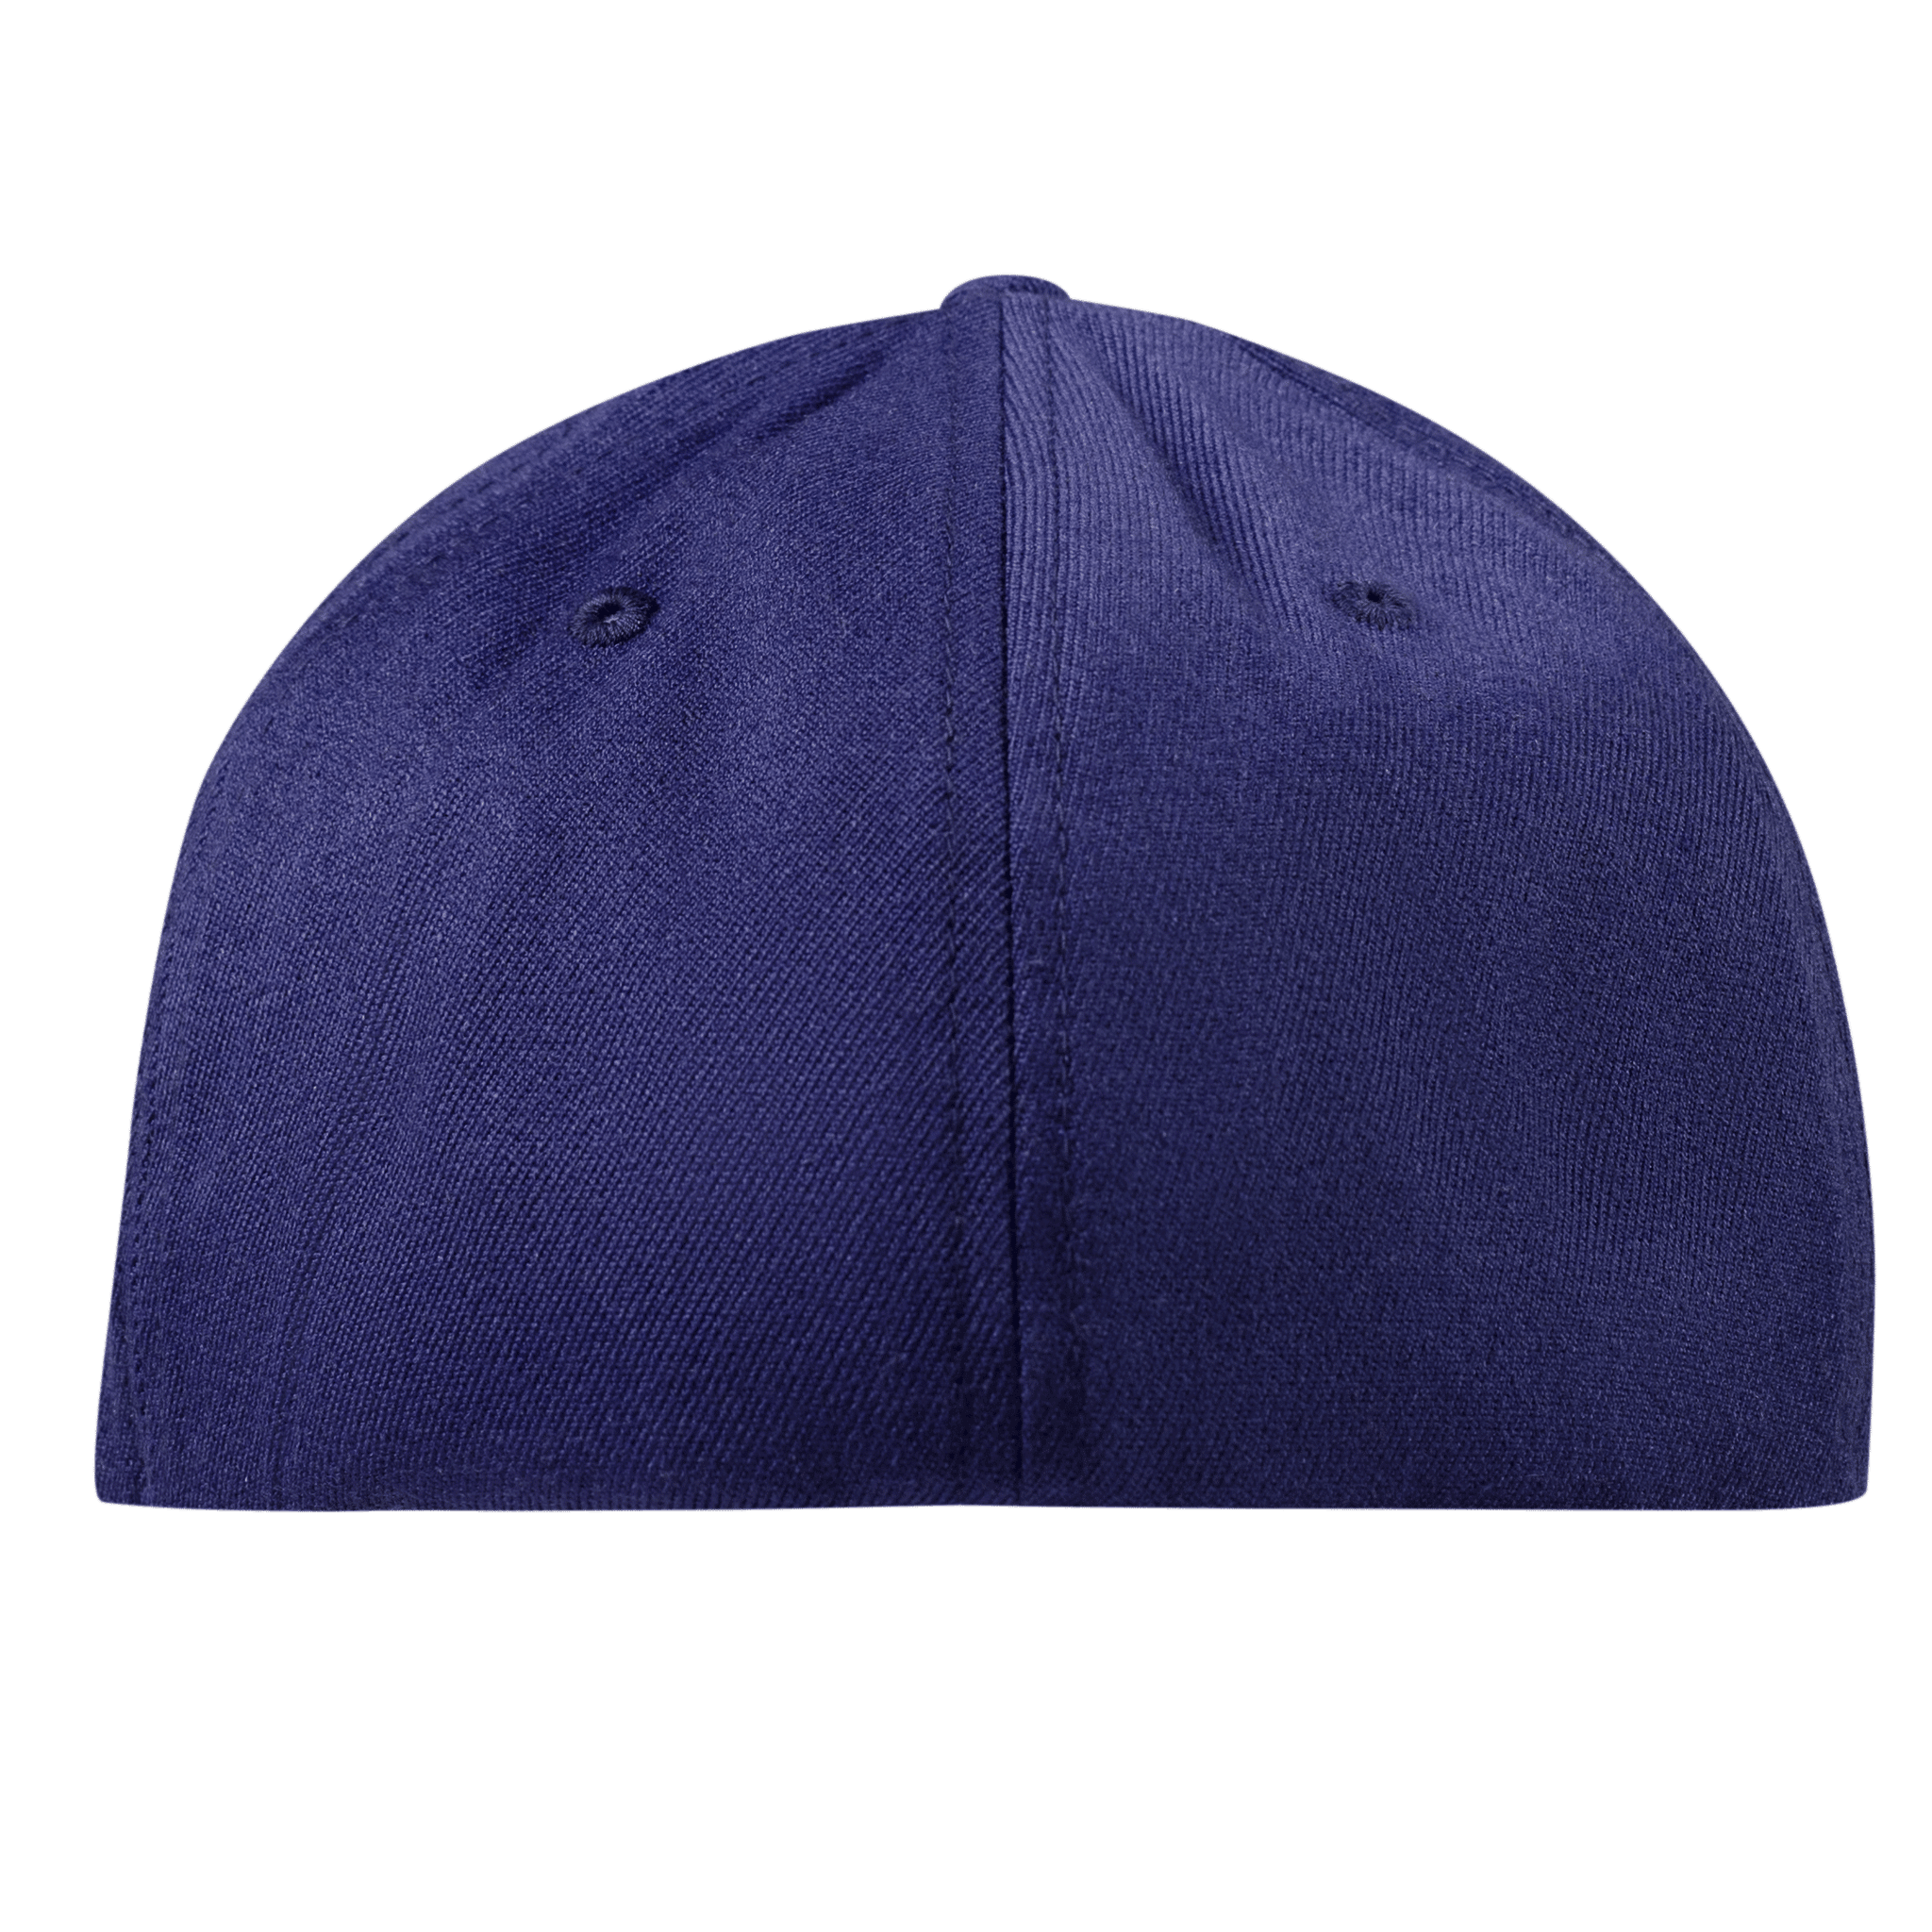 Oklahoma Compass Flexfit Fitted Back Navy